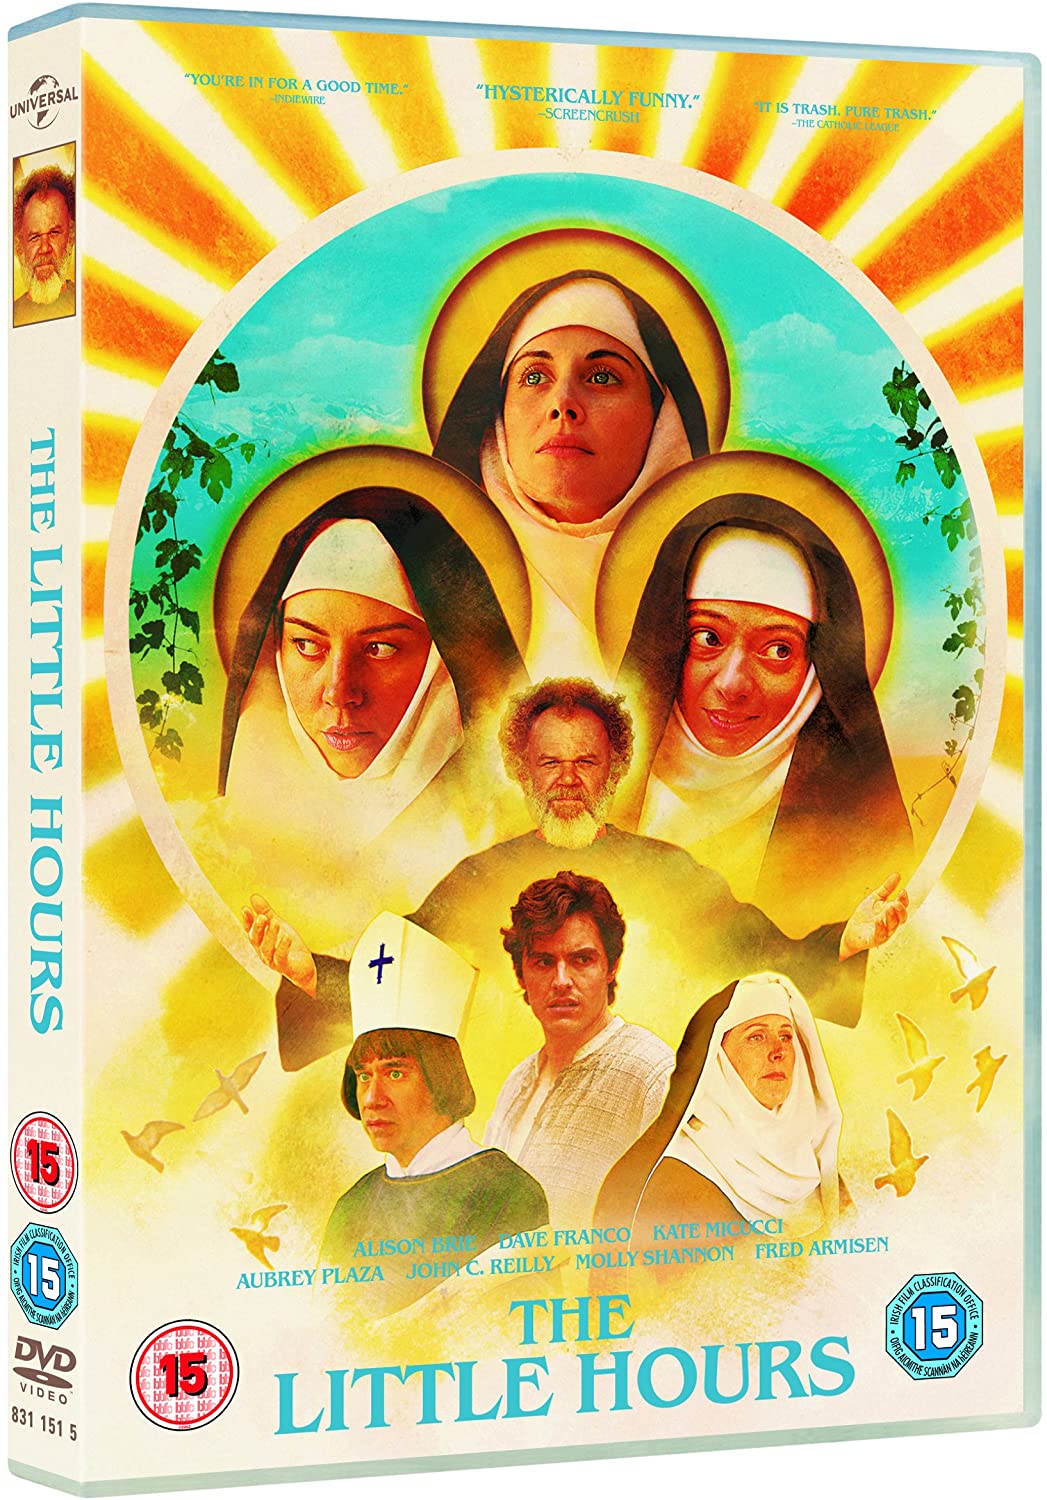 The Little Hours (DVD)